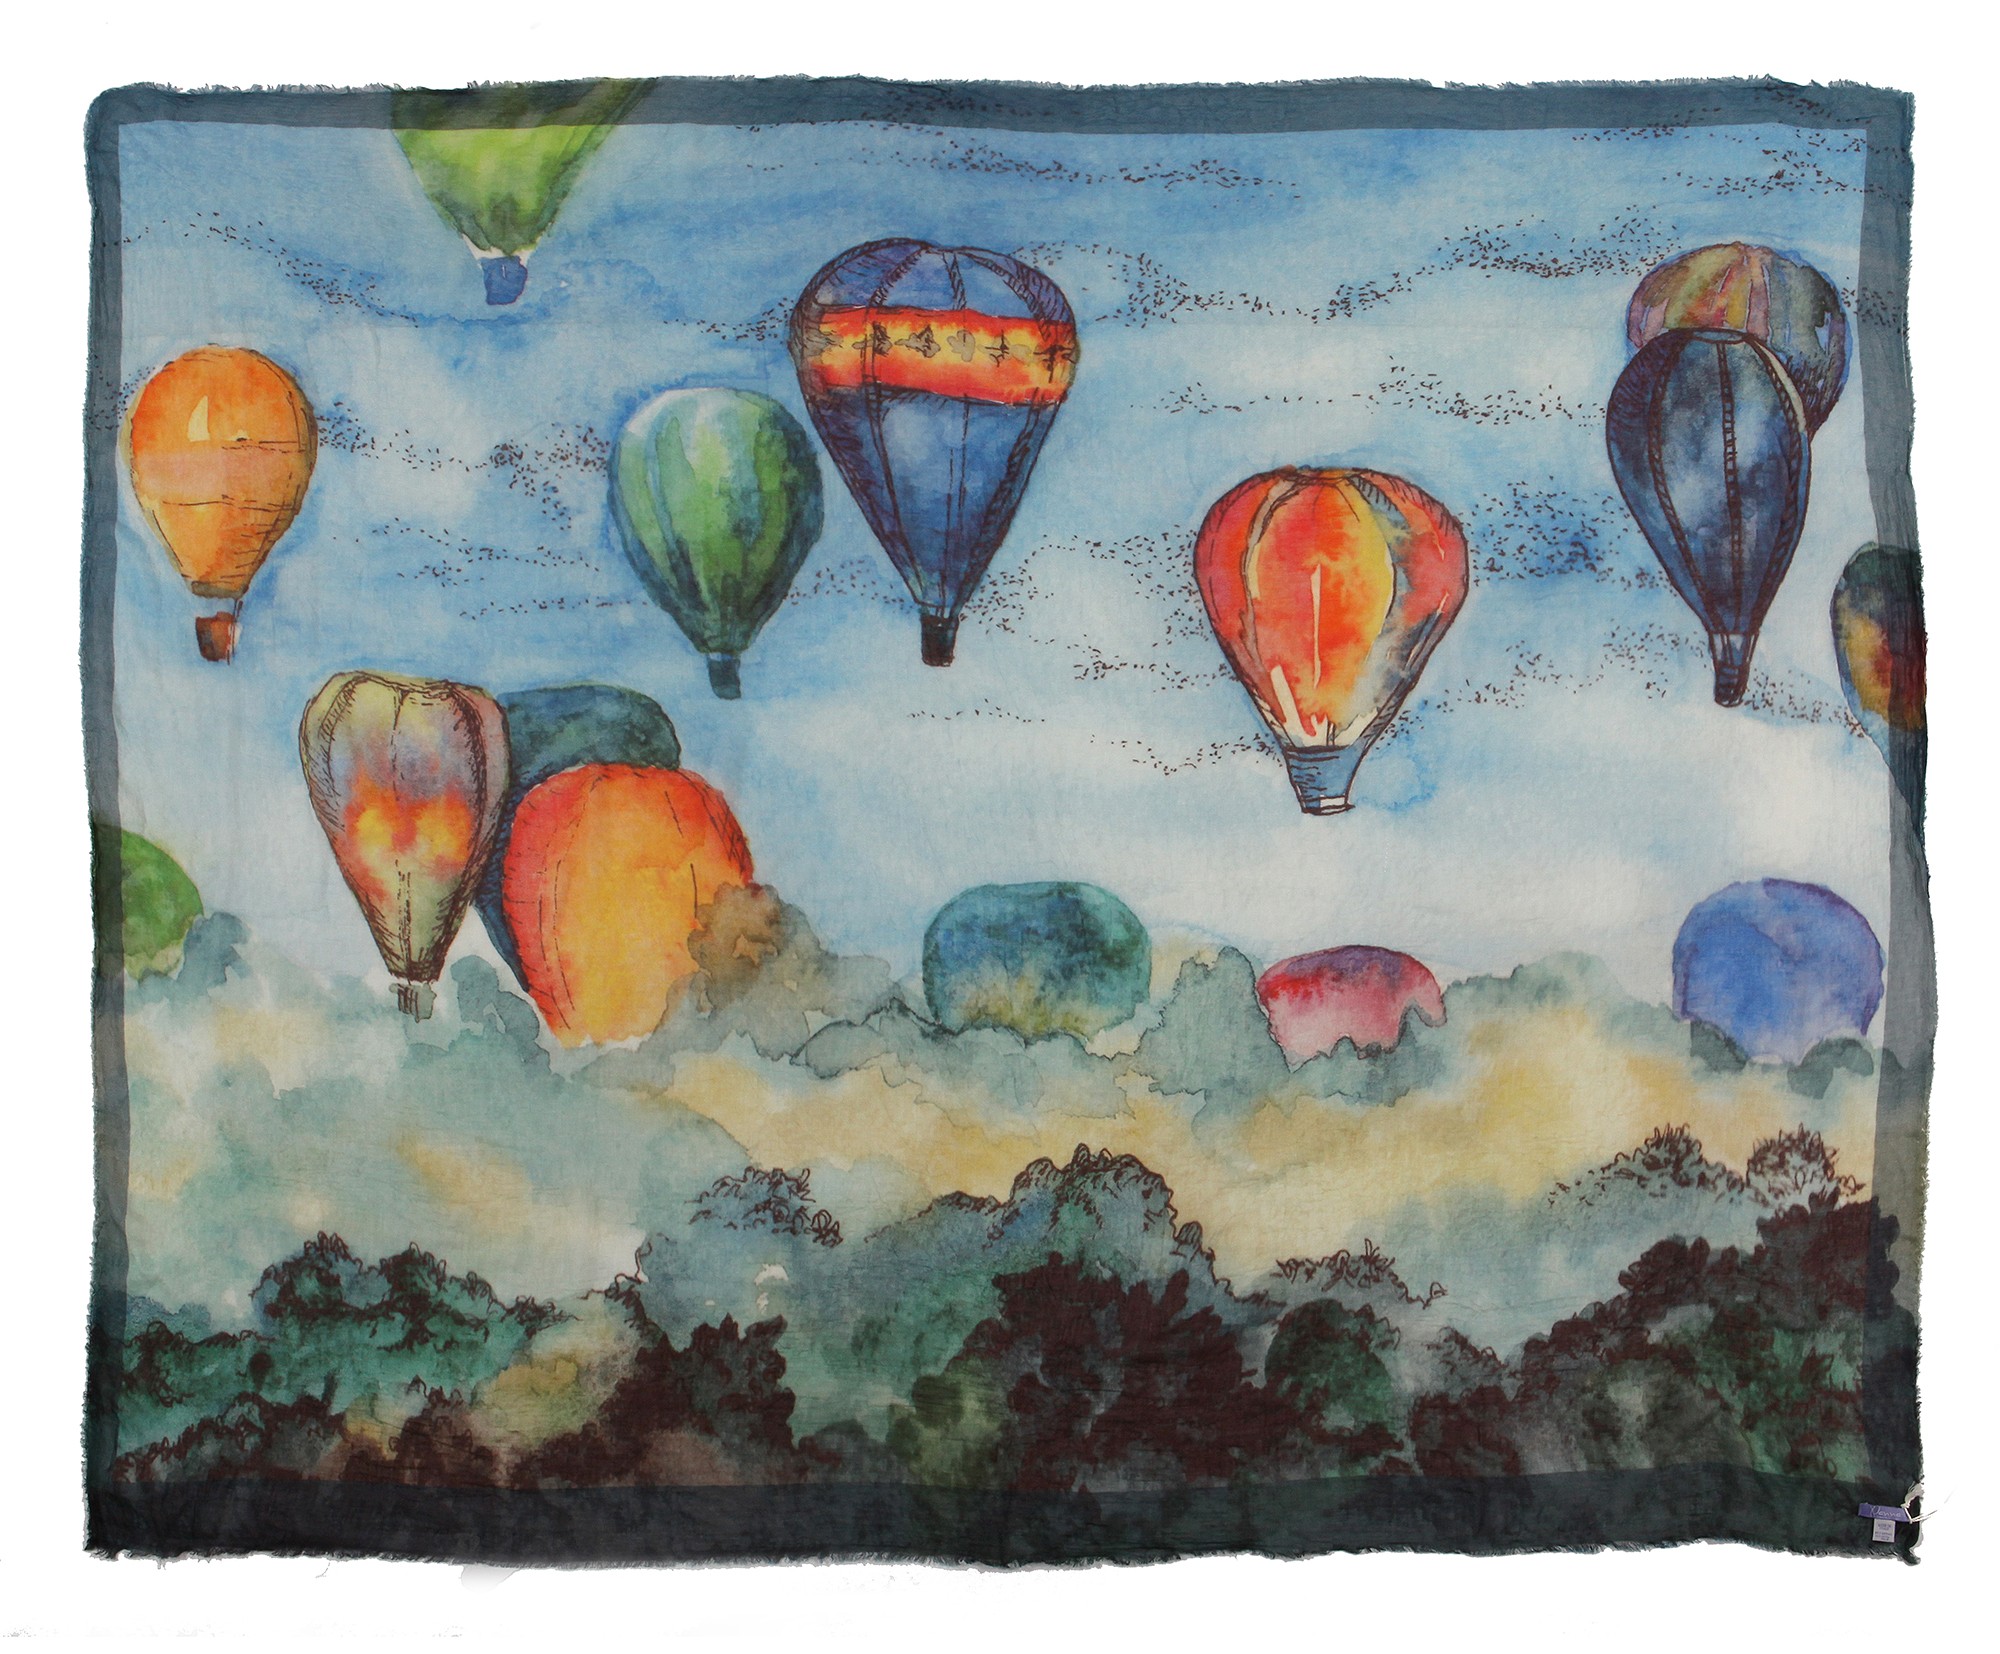 813 - Annalisa Giuntini - Silk Scarf with Hot Air Balloons Fly Over a Wood  - Scarves and Foulard - Scarf of High Quality Luxury - Avvenice